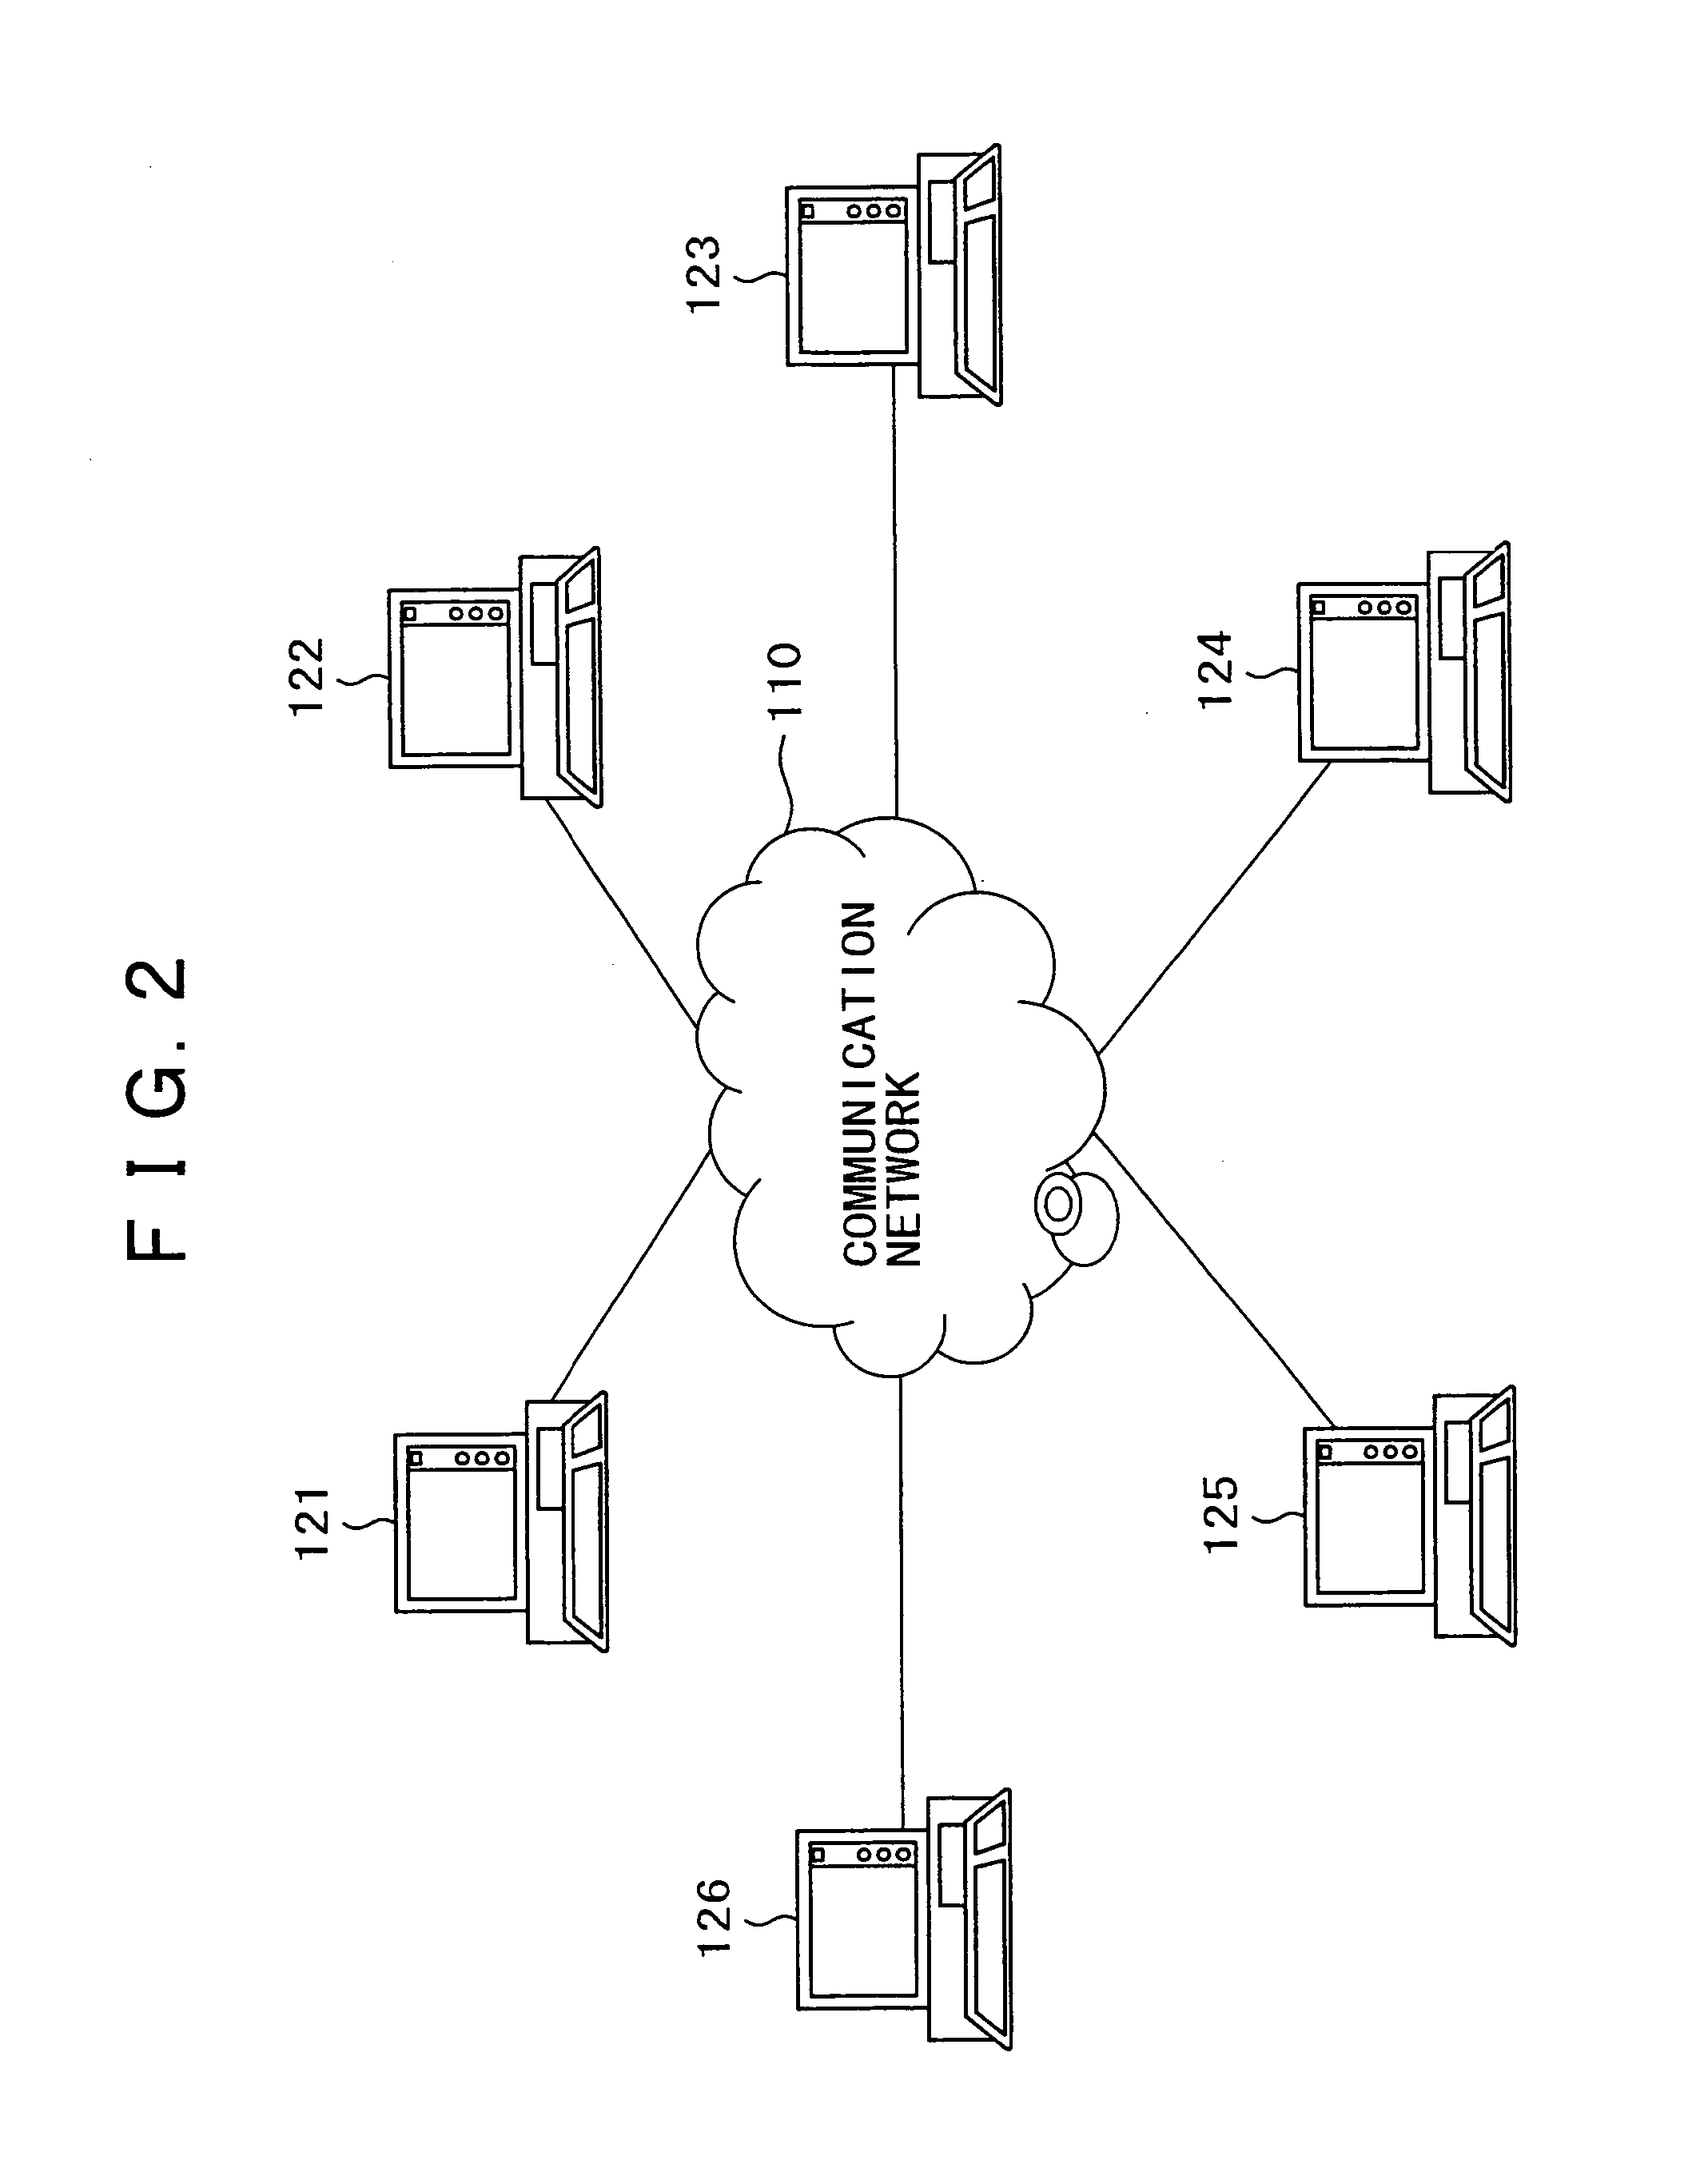 Controlling data transmission on a data storage network by selecting from multiple transmission modes